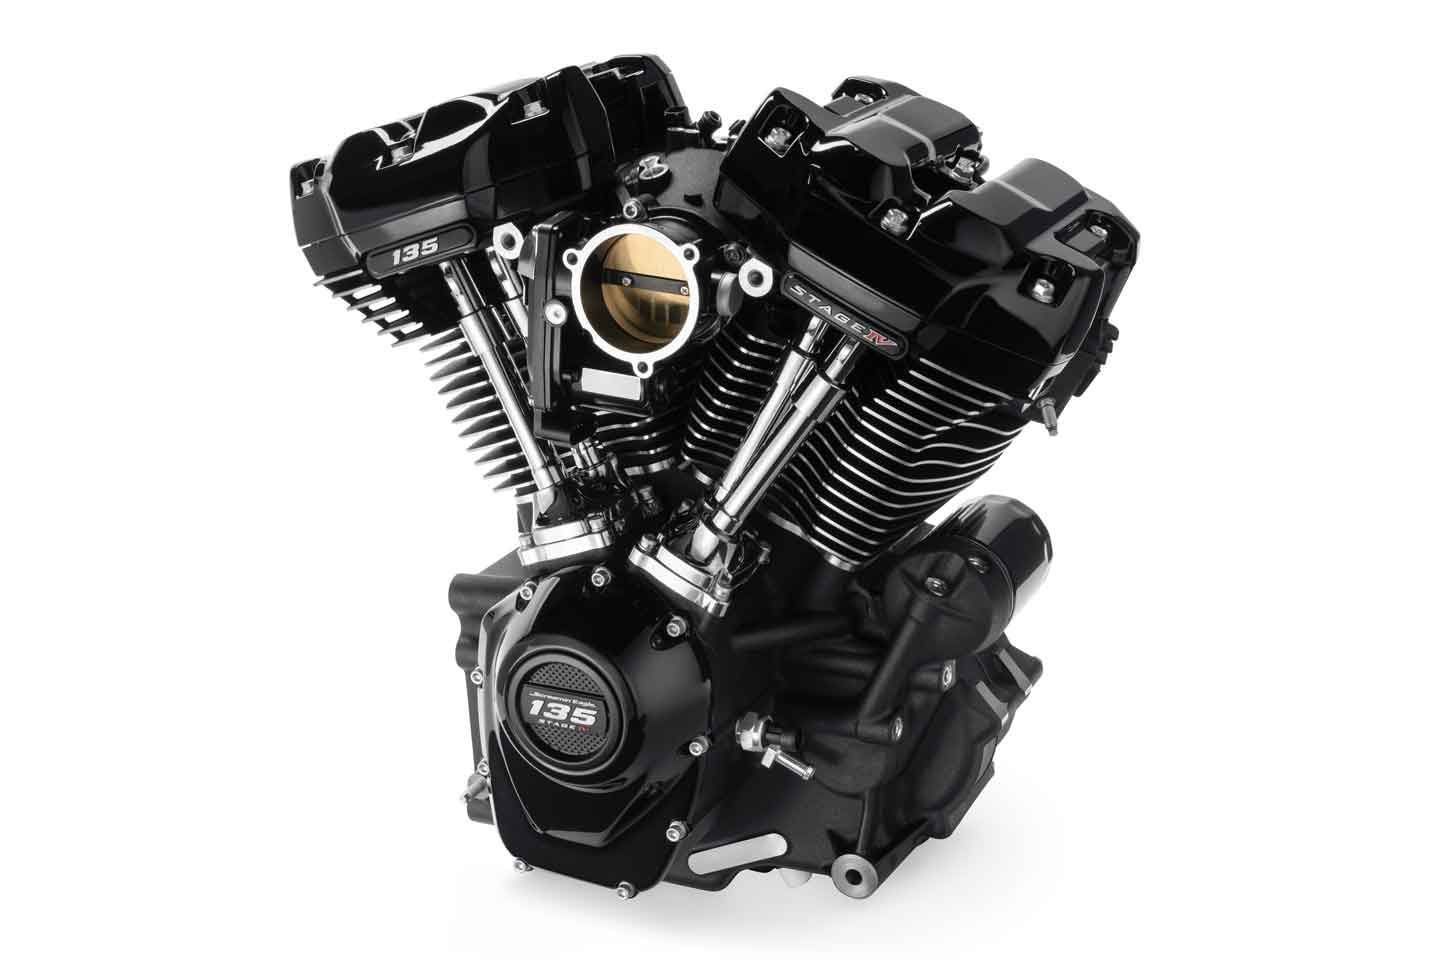 Harley-Davidson’s Screamin’ Eagle 135R Stage IV crate engine. Why is it called a crate engine? It comes in a crate!